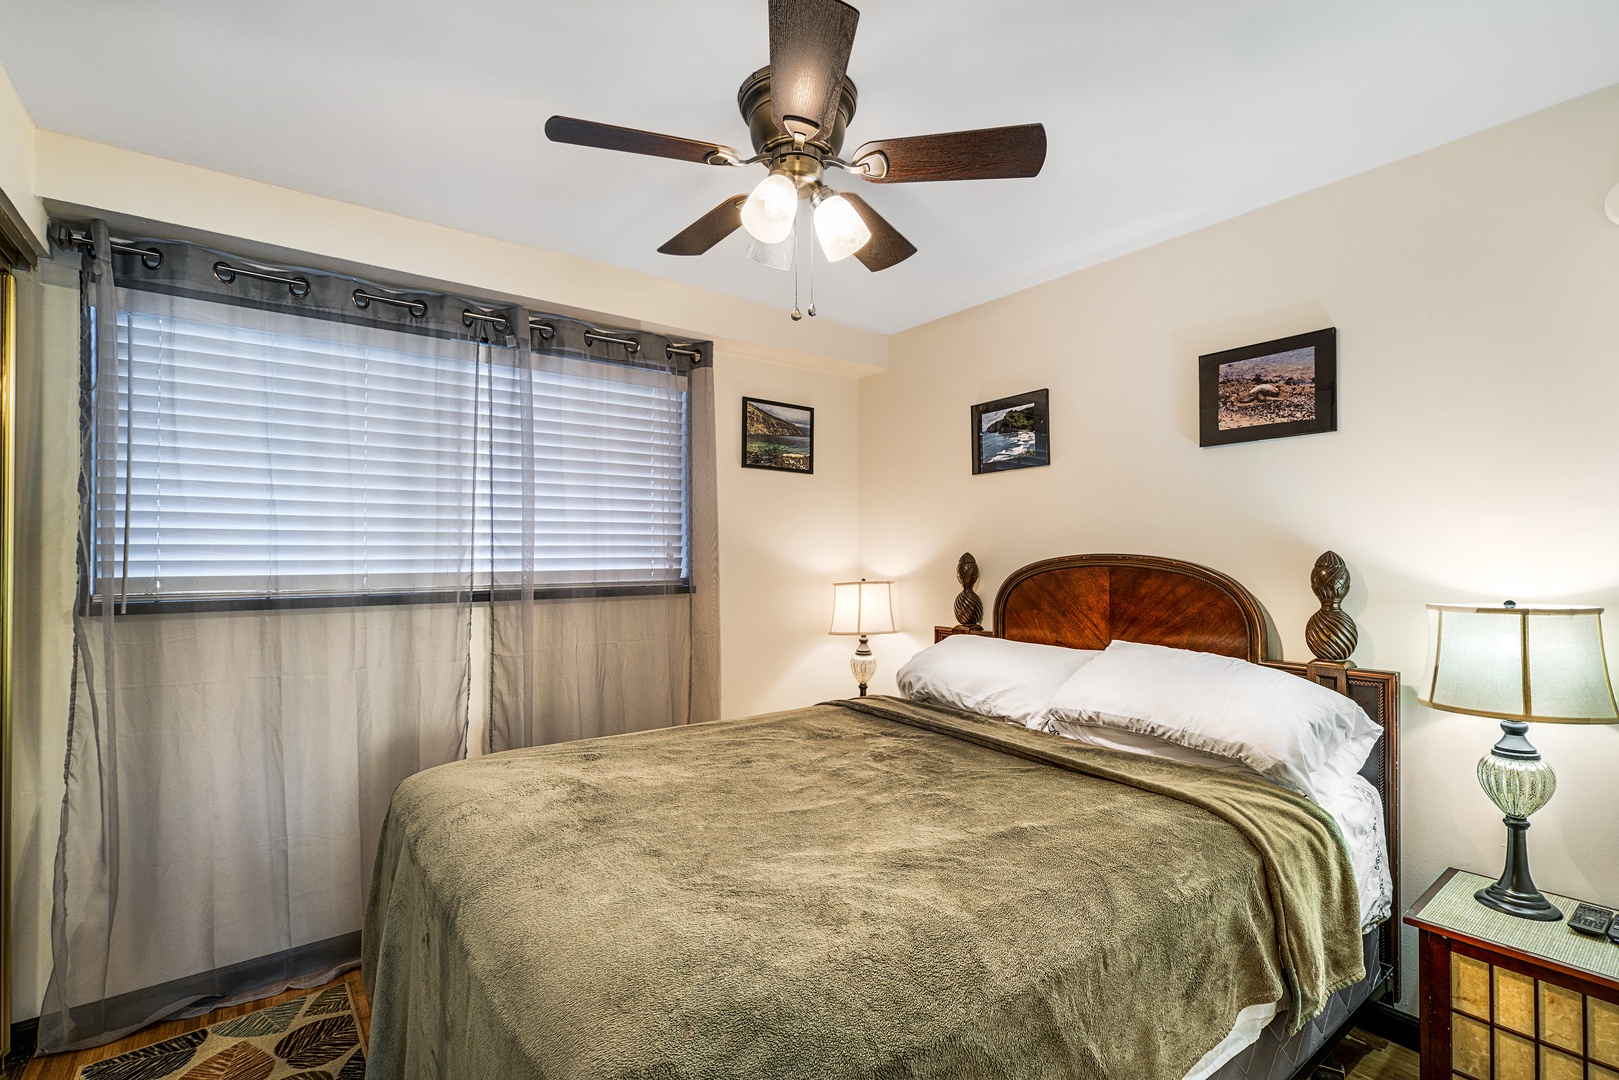 Kailua Kona Vacation Rentals, OFB Kona Plaza 112 - Guest bedroom equipped with Queen bed!